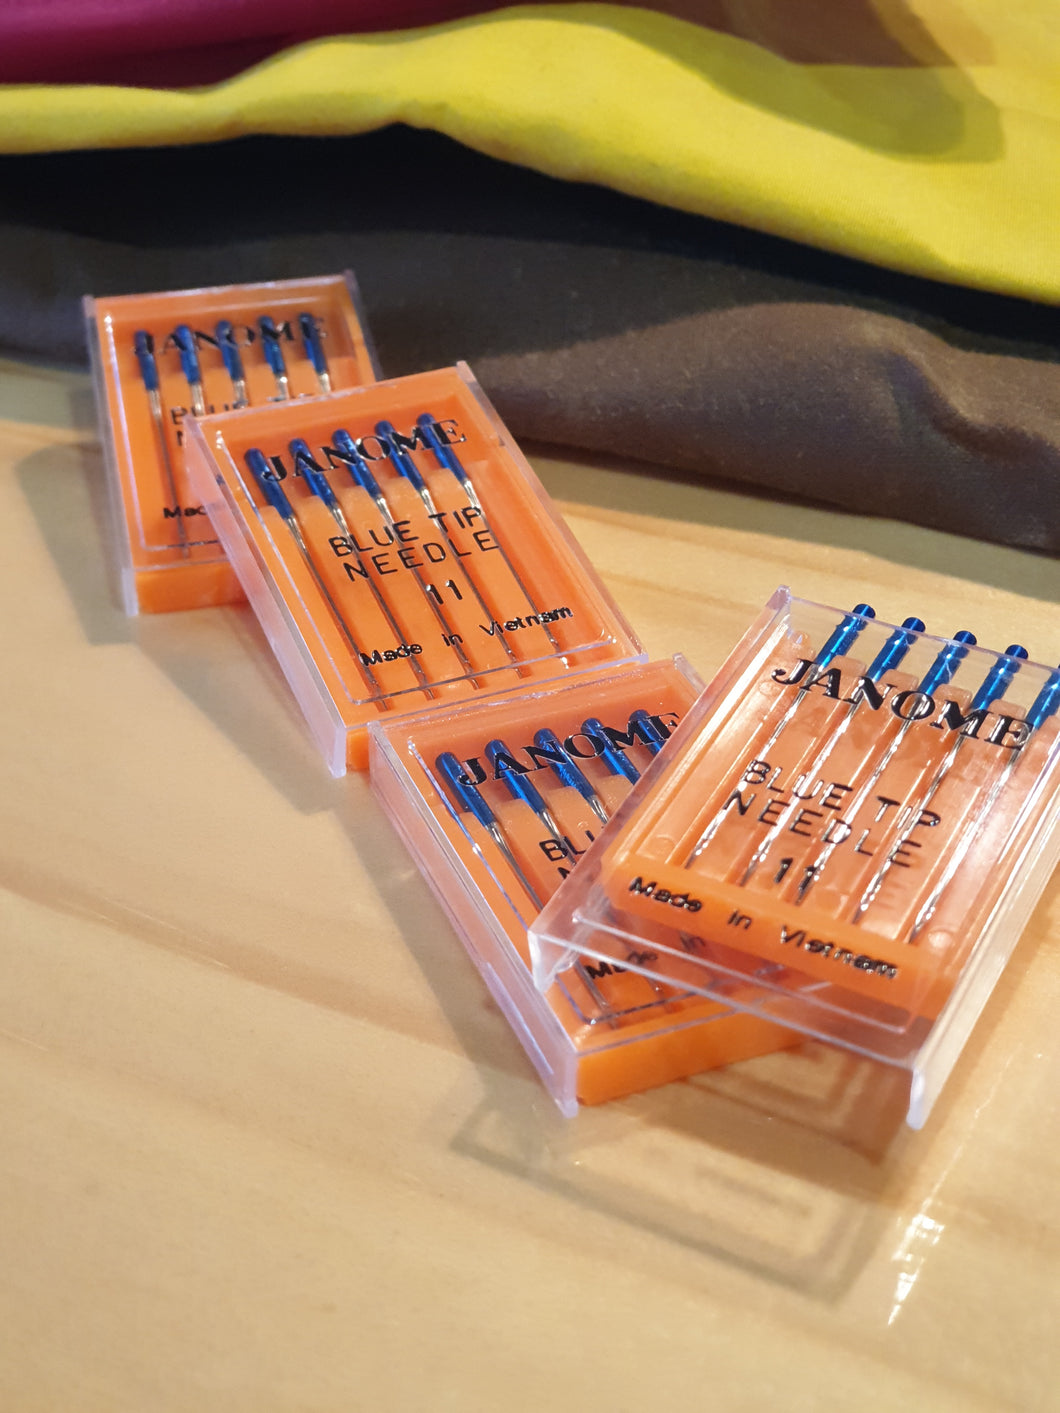 Blue Tip Sewing Needles. $10.00NZD per Pack.